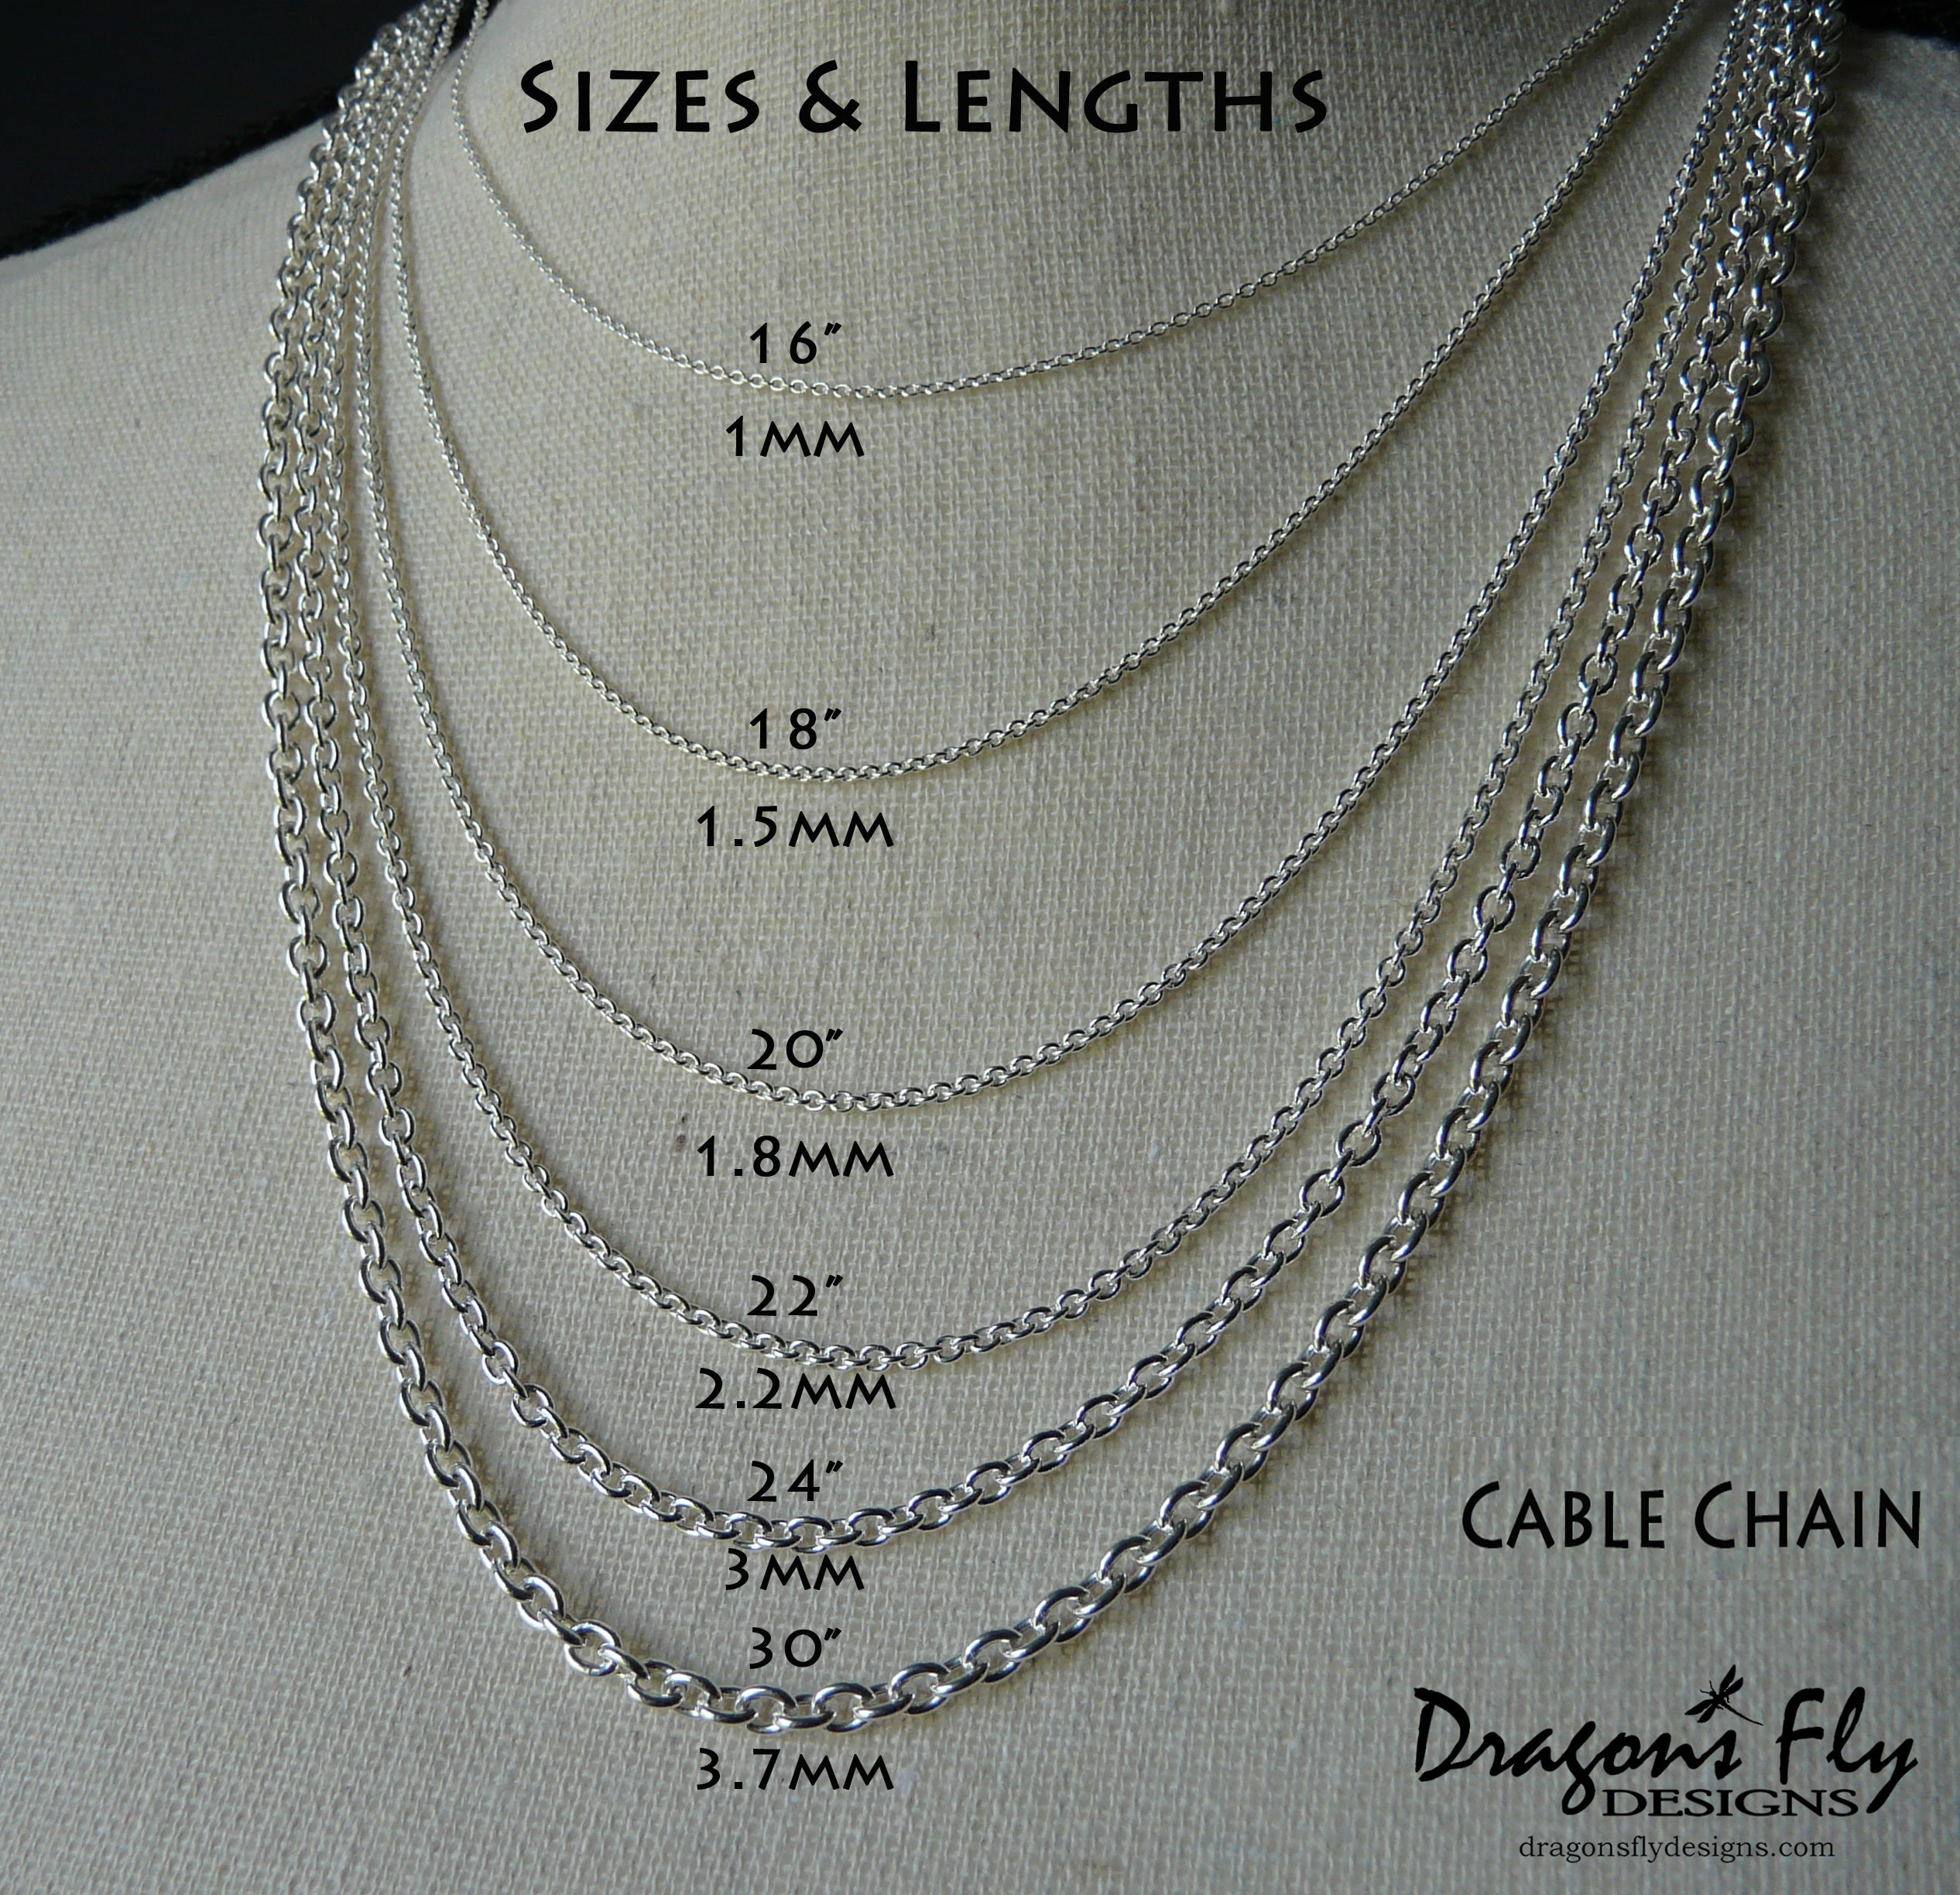 16 pieces or 8 sets of Rhodium over Sterling Silver X-Large Backs -  GGKIT01A